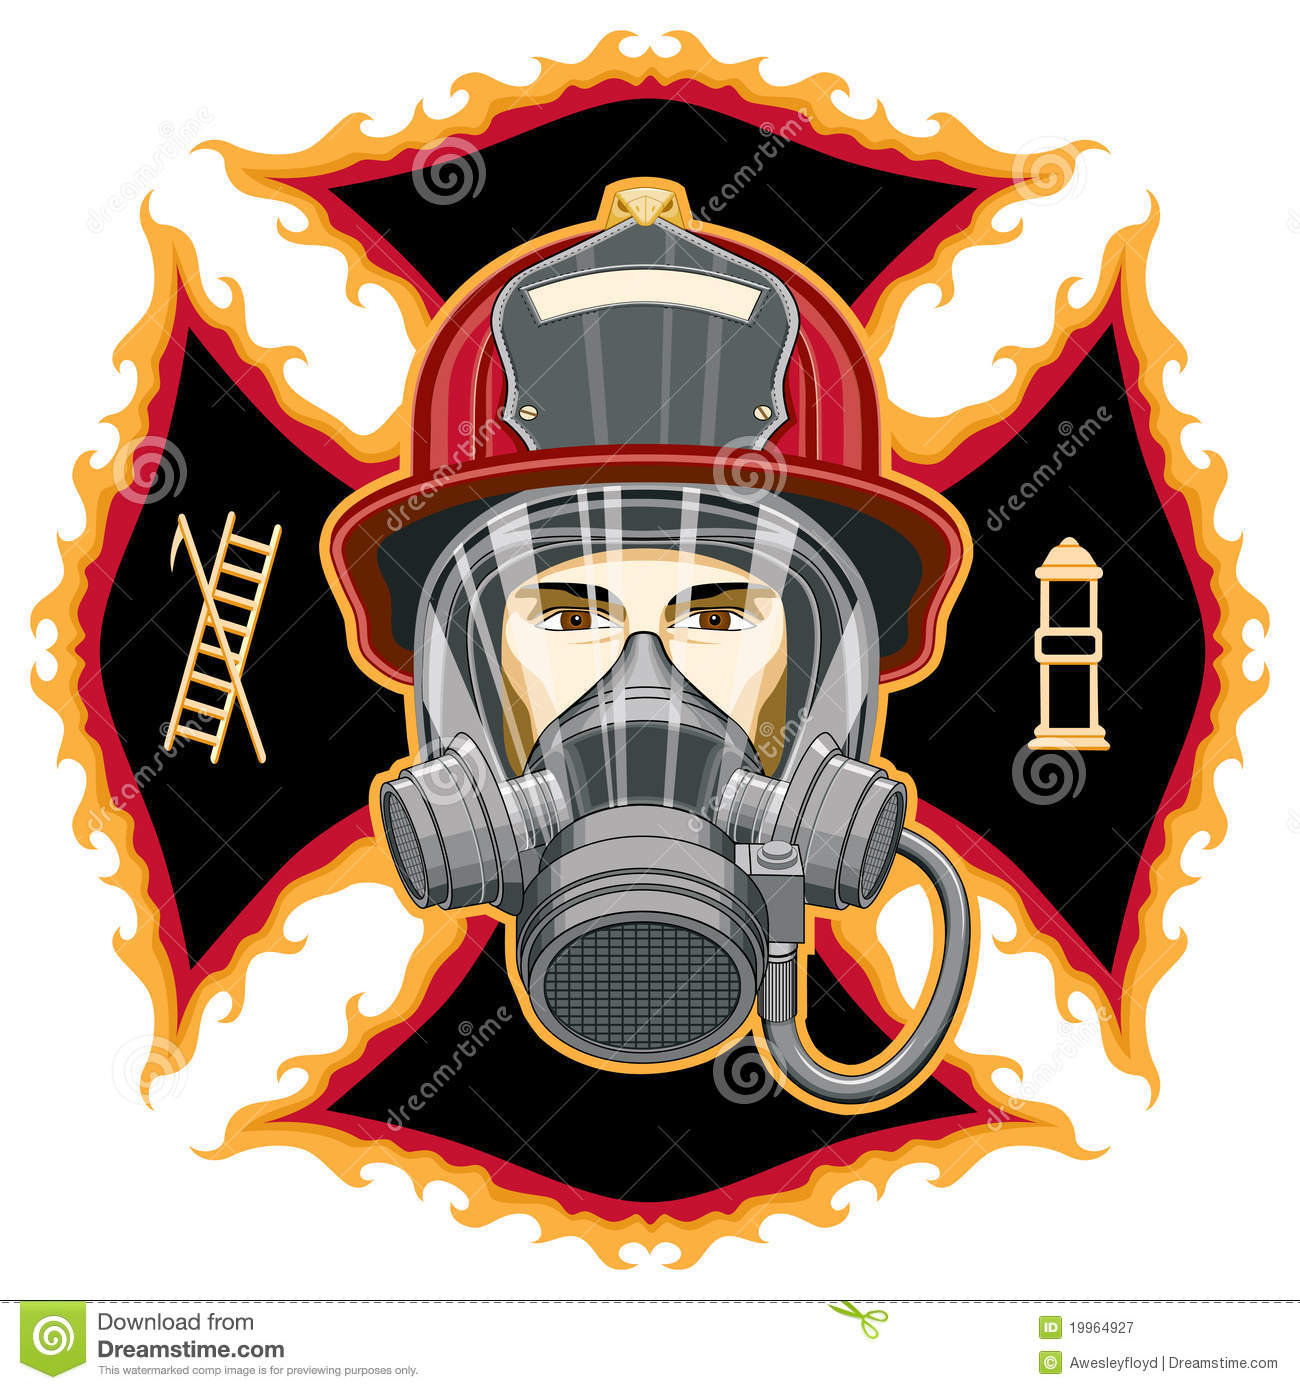 Illustration Of The Head Of A Firefighter With A Helmet And Mask In